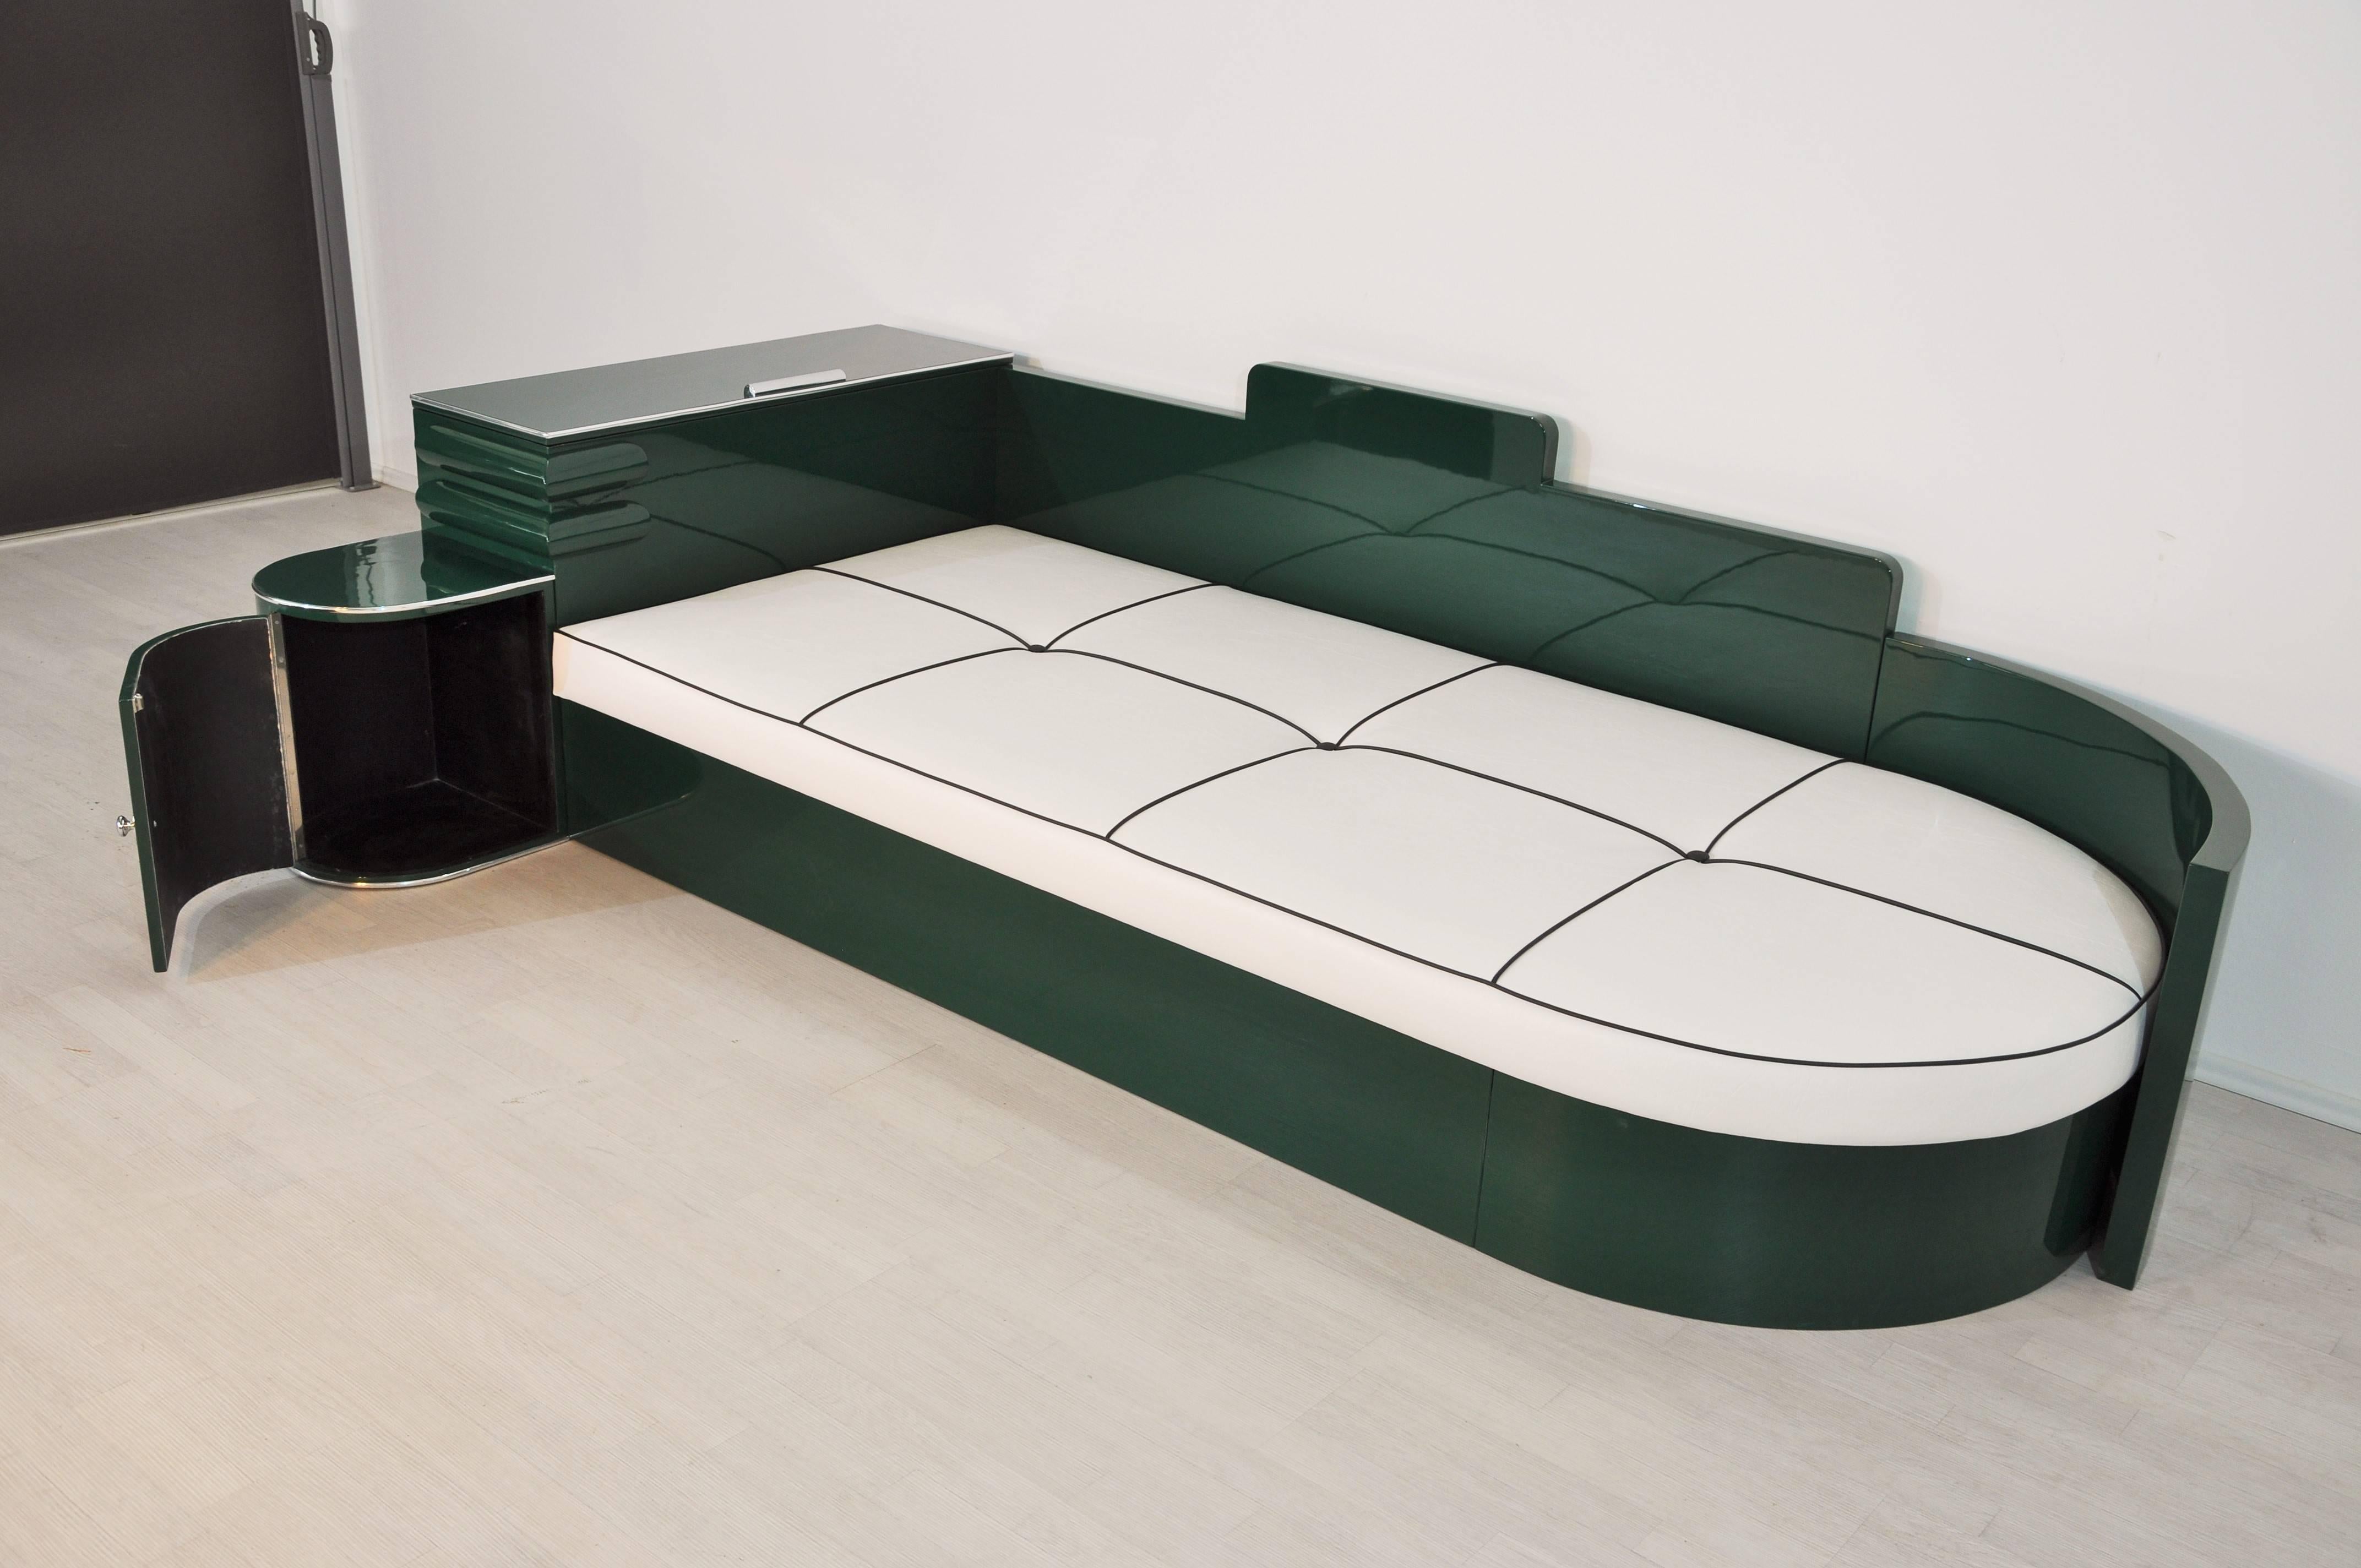 French High Gloss Art Deco Daybed from France in Jaguar Racing Green